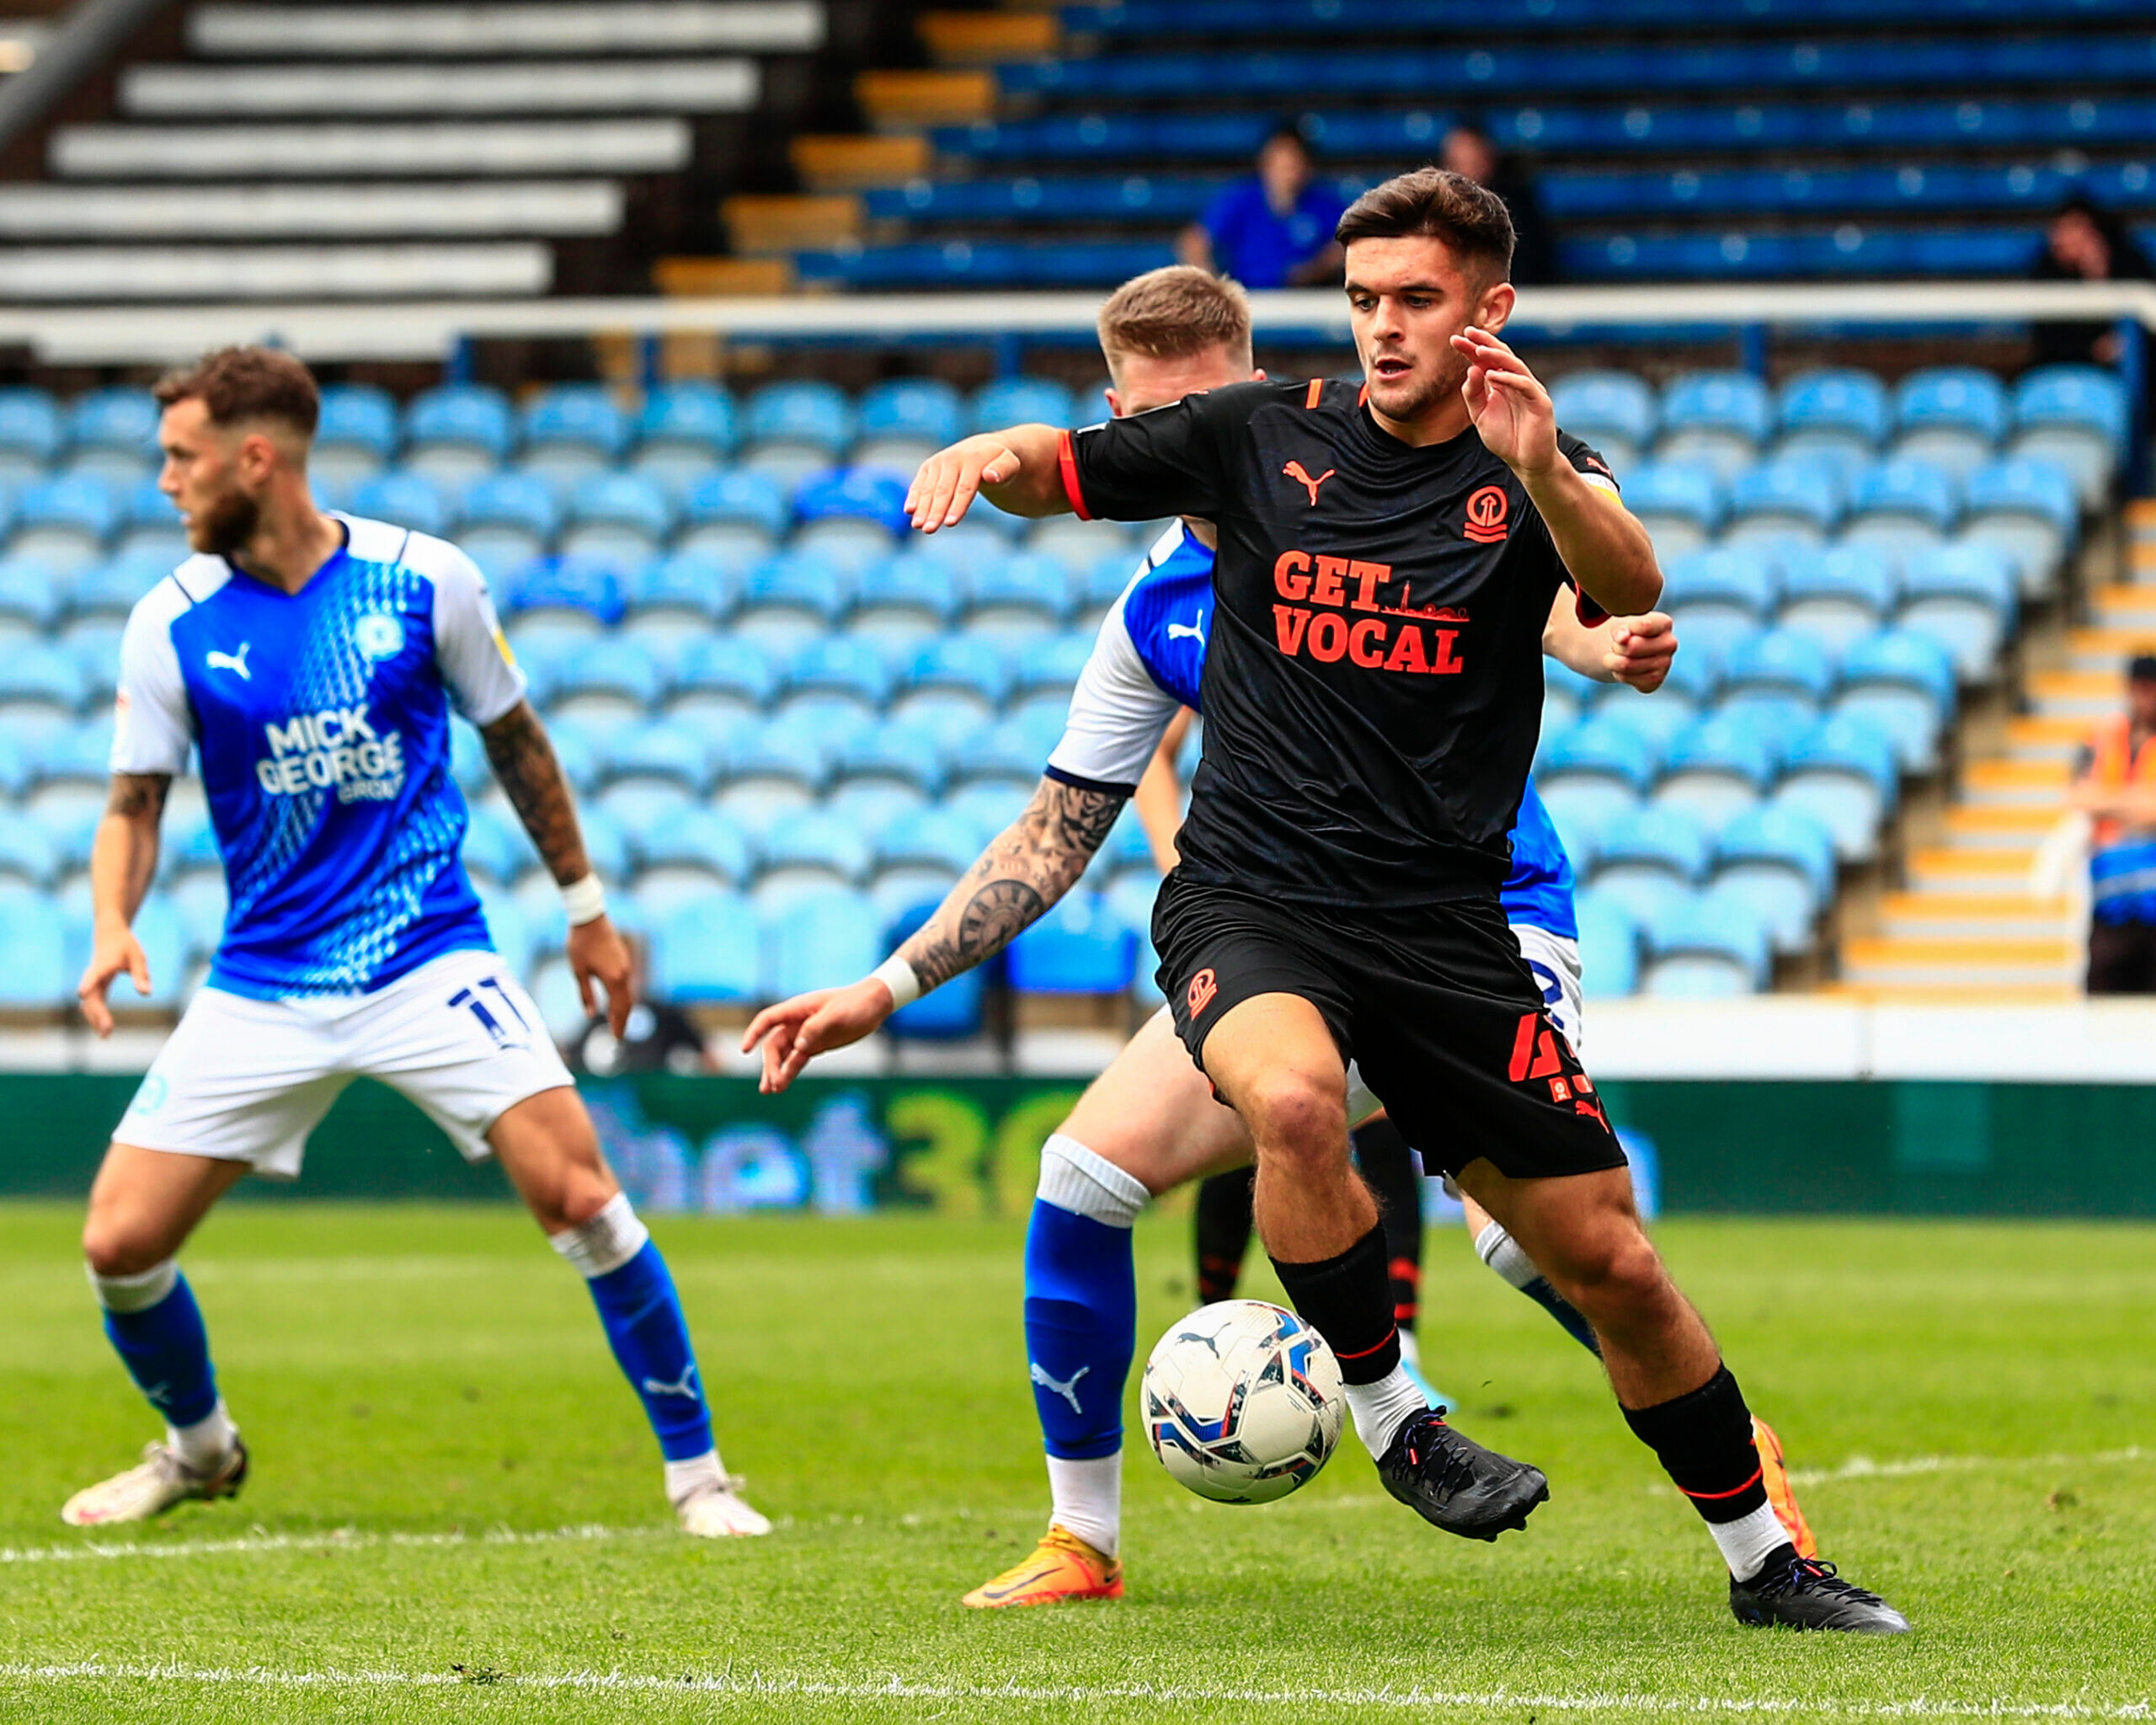 PETERBOROUGH, ENGLAND - MAY 07: Blackpool's Jake Daniels during the Sky Bet Championship match between Peterborough United and Blackpool at London Road Stadium on May 7, 2022 in Peterborough, England.